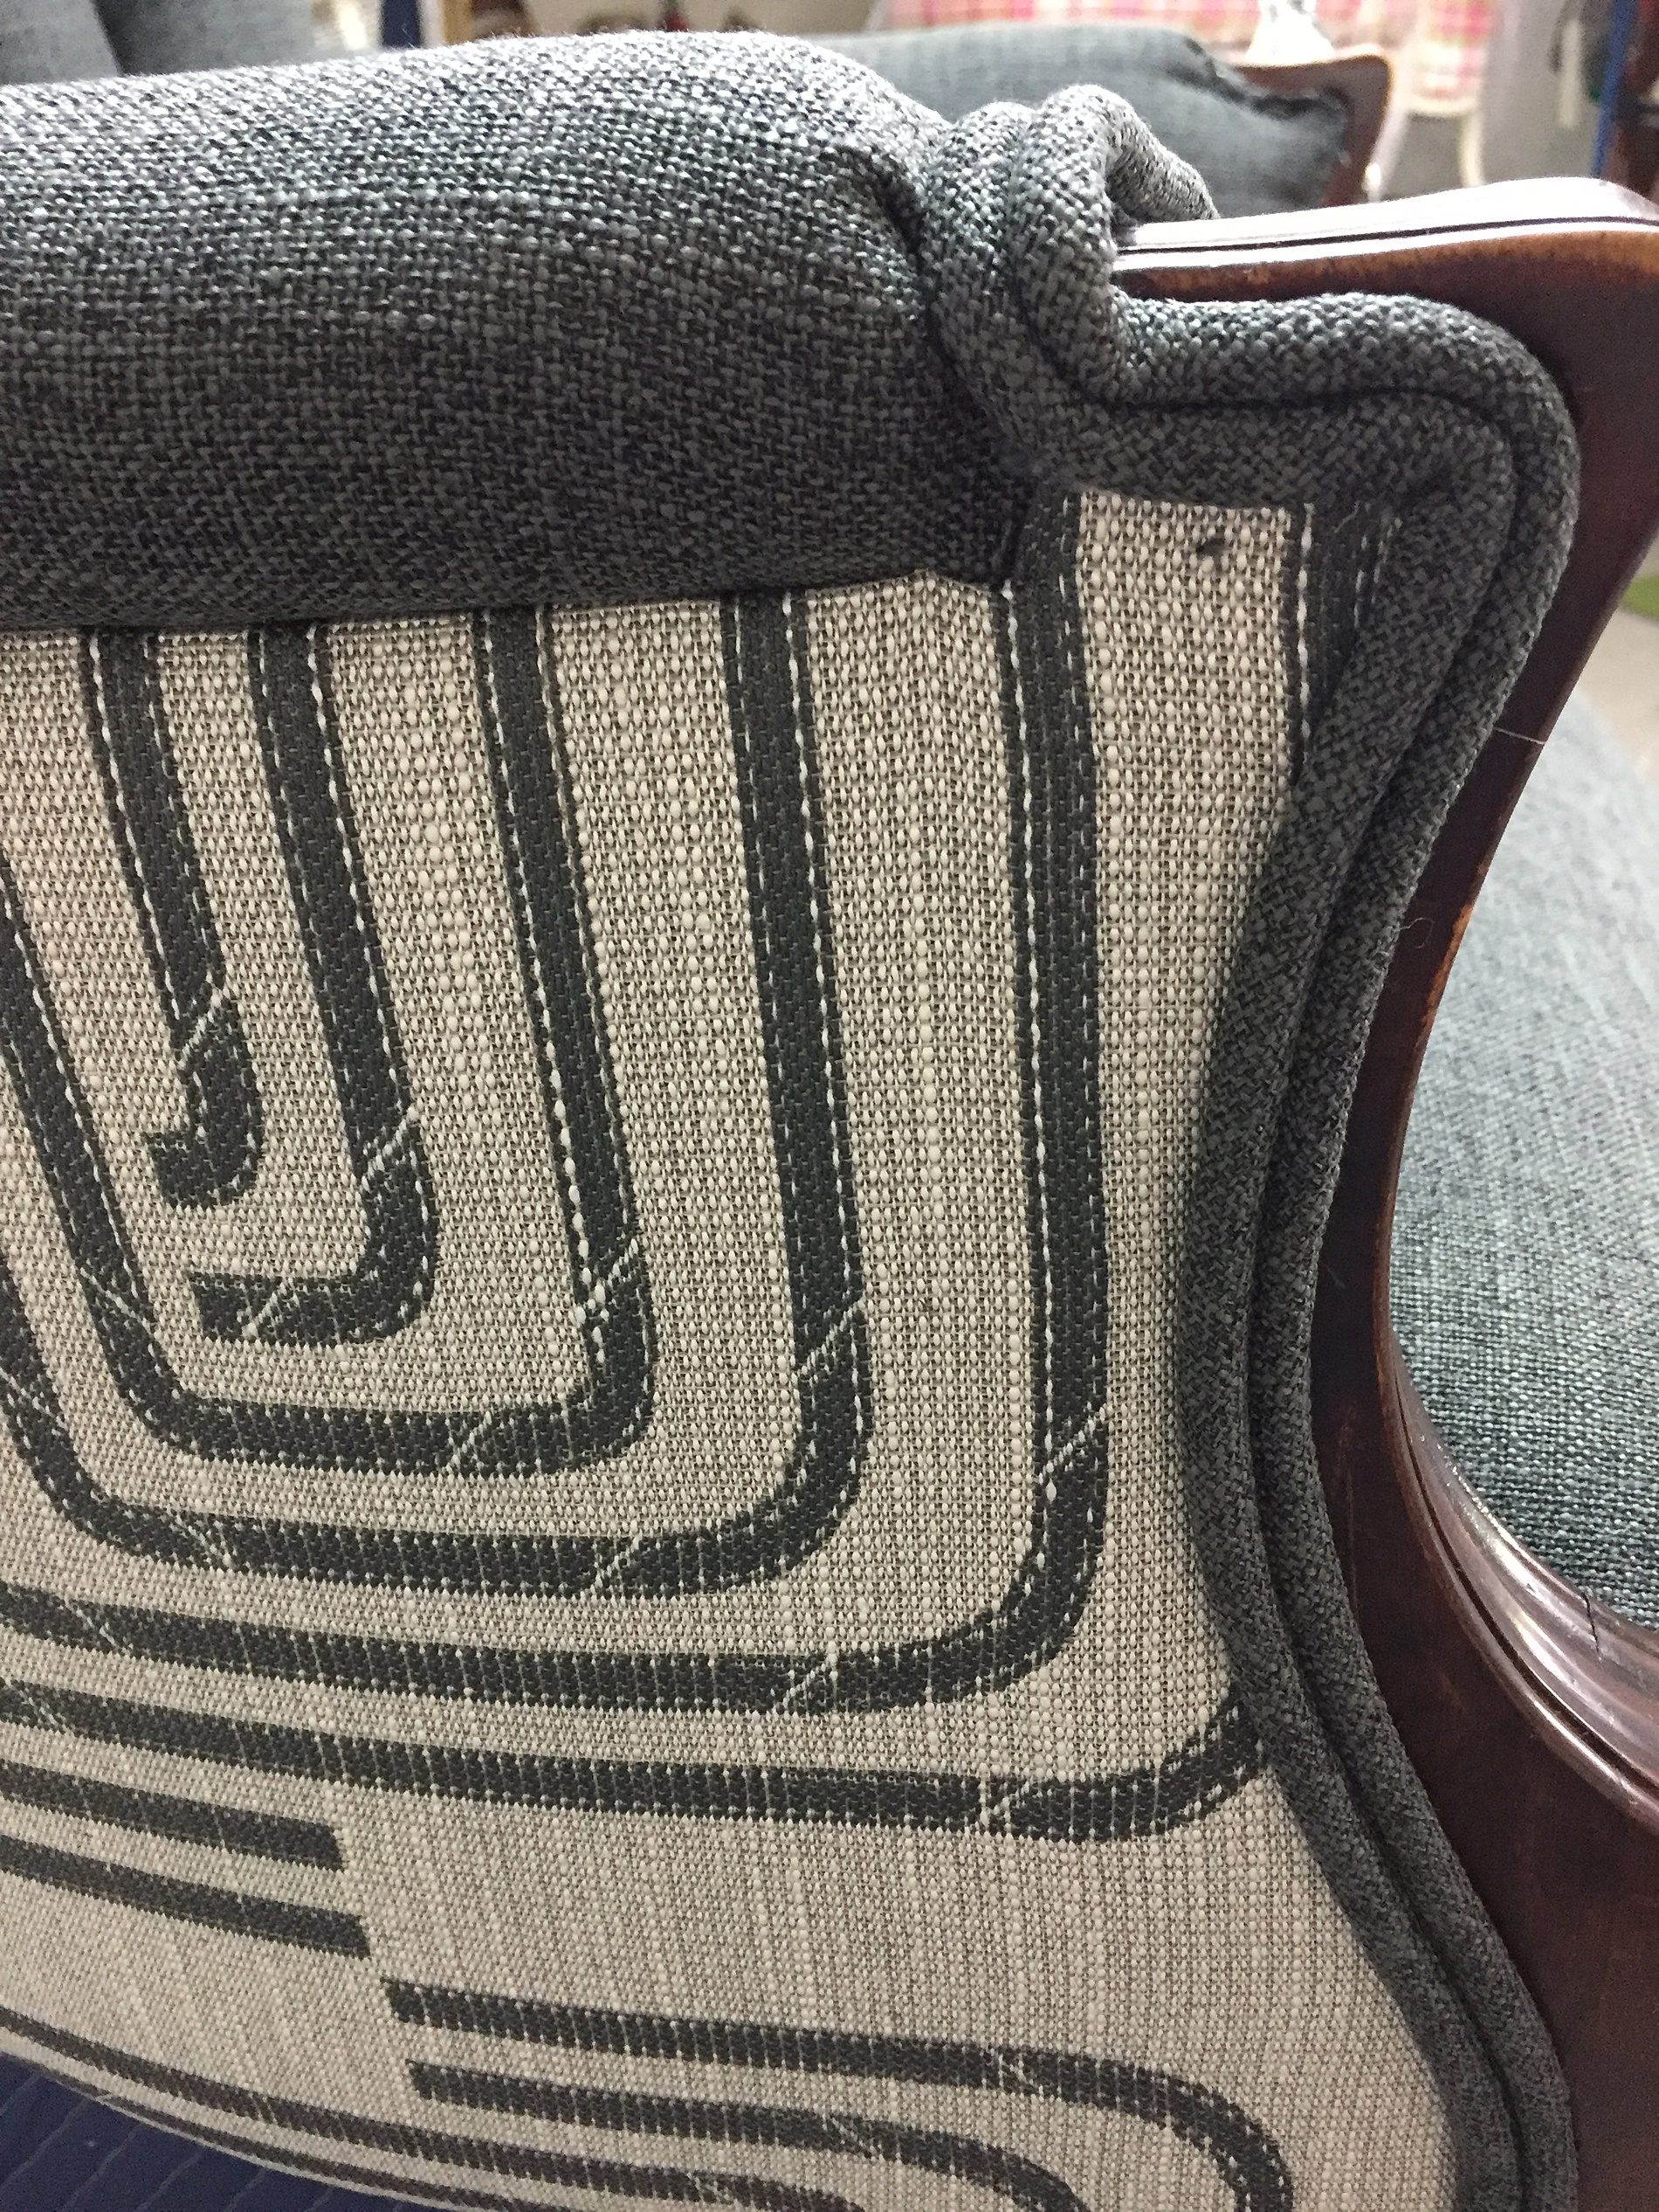 Final Phase of Reupholstering | Fabric and Decorative Details